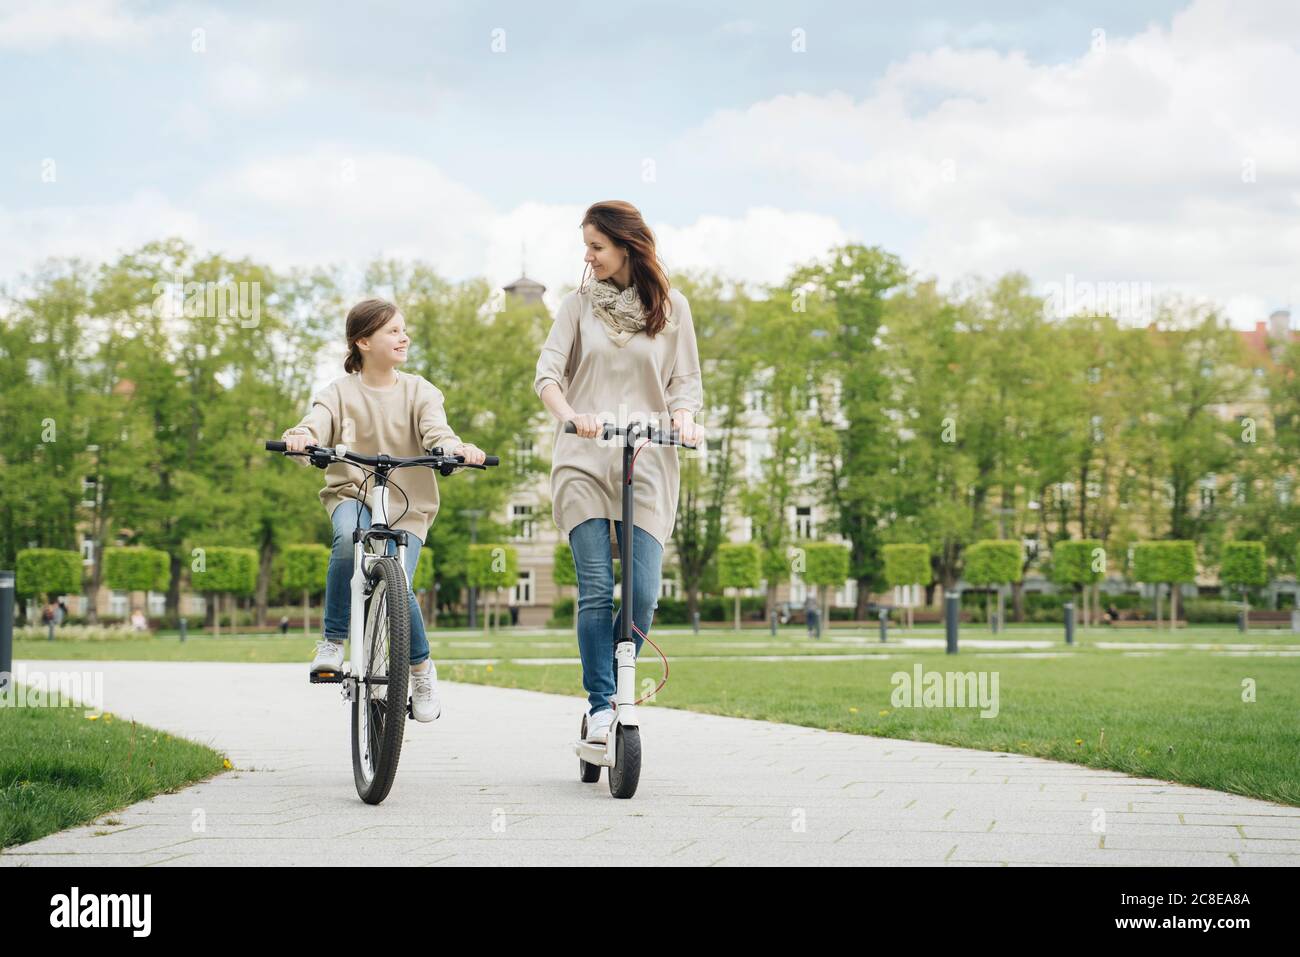 Girl cycling while mother riding electric scooter in city park Stock Photo